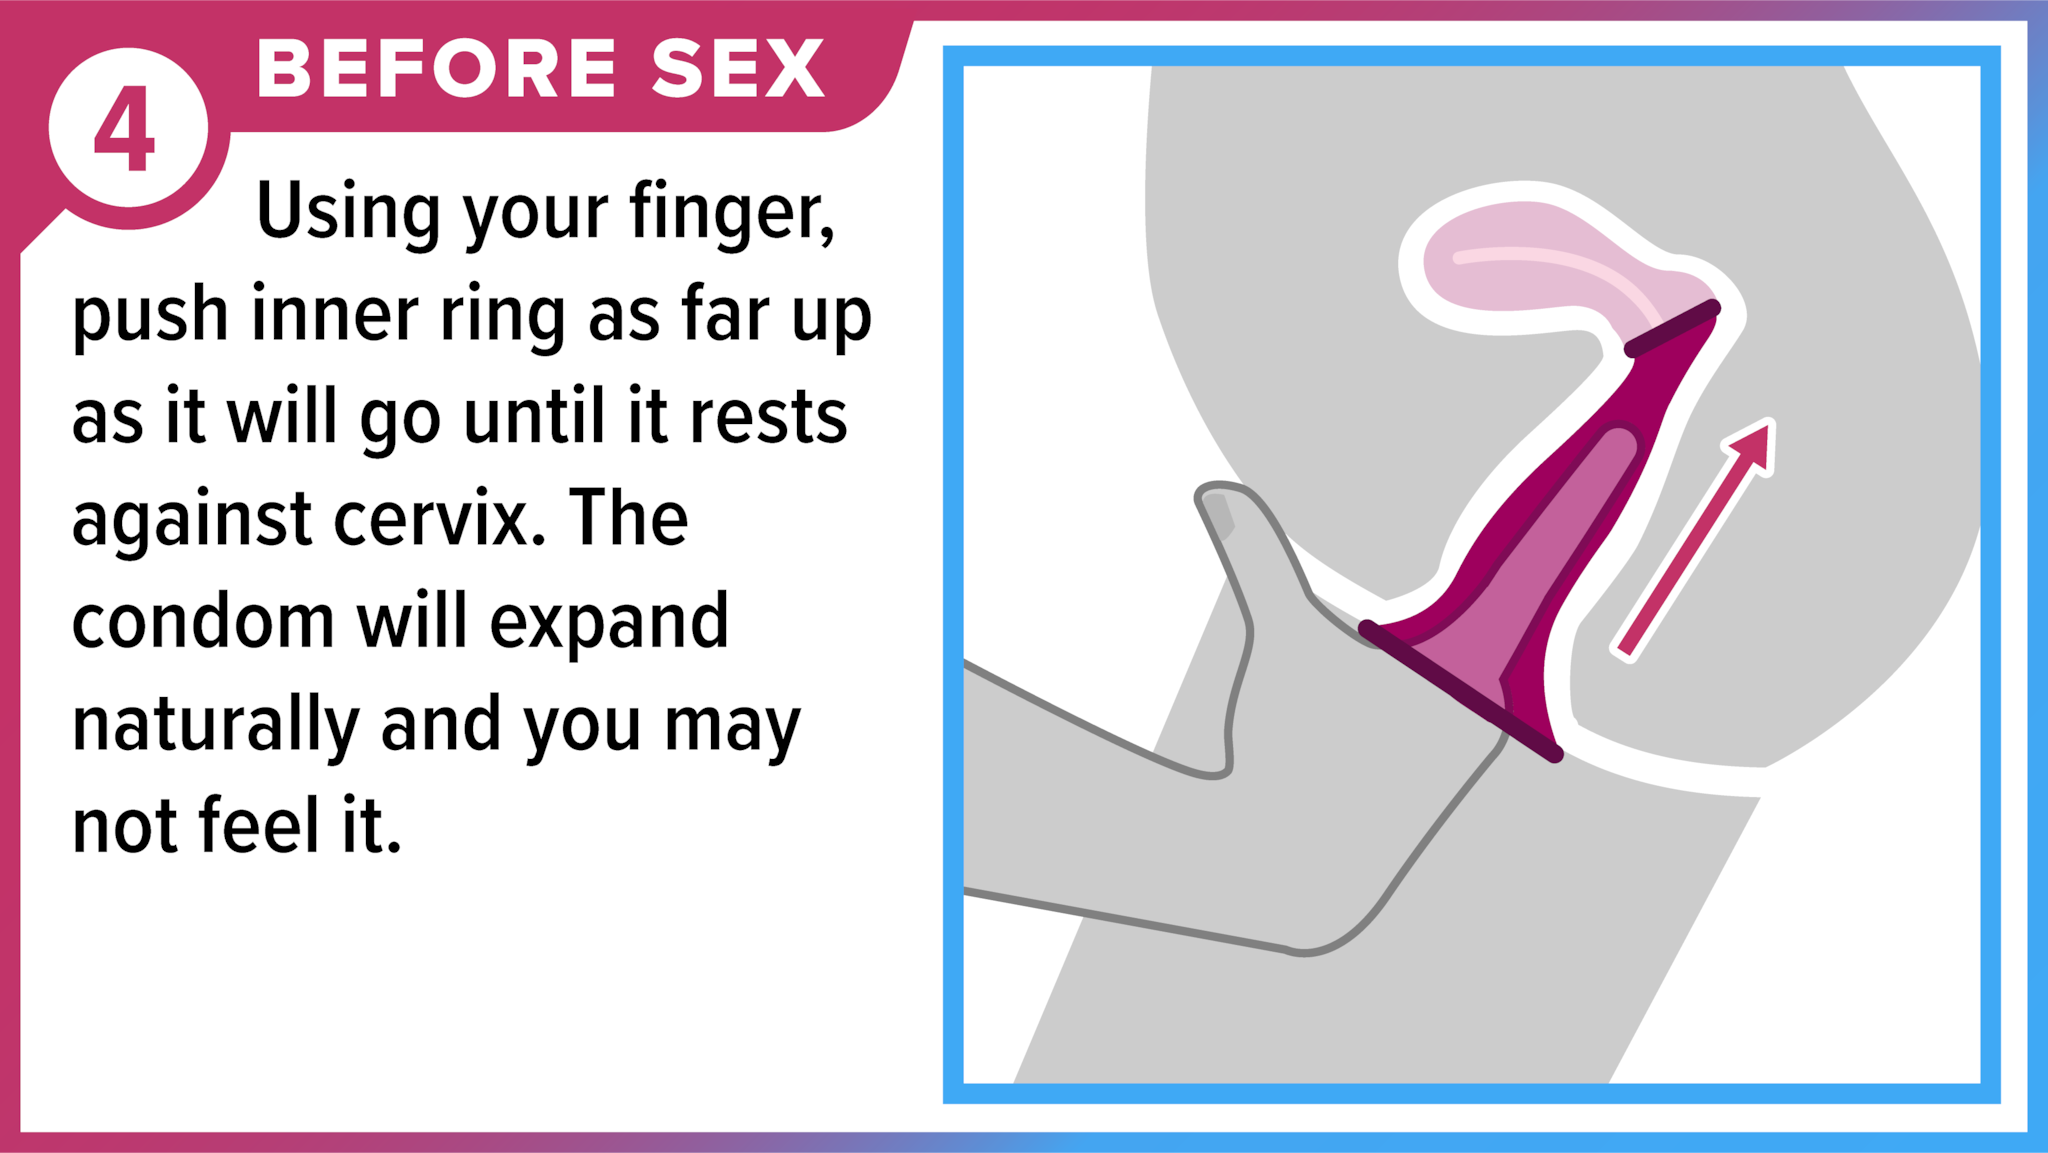 Finger inserting female condom into vagina. Before sex - Using your finger, push inner ring as far up as it will go until it rests against cervix. The condom will expand naturally, and you may not feel it.